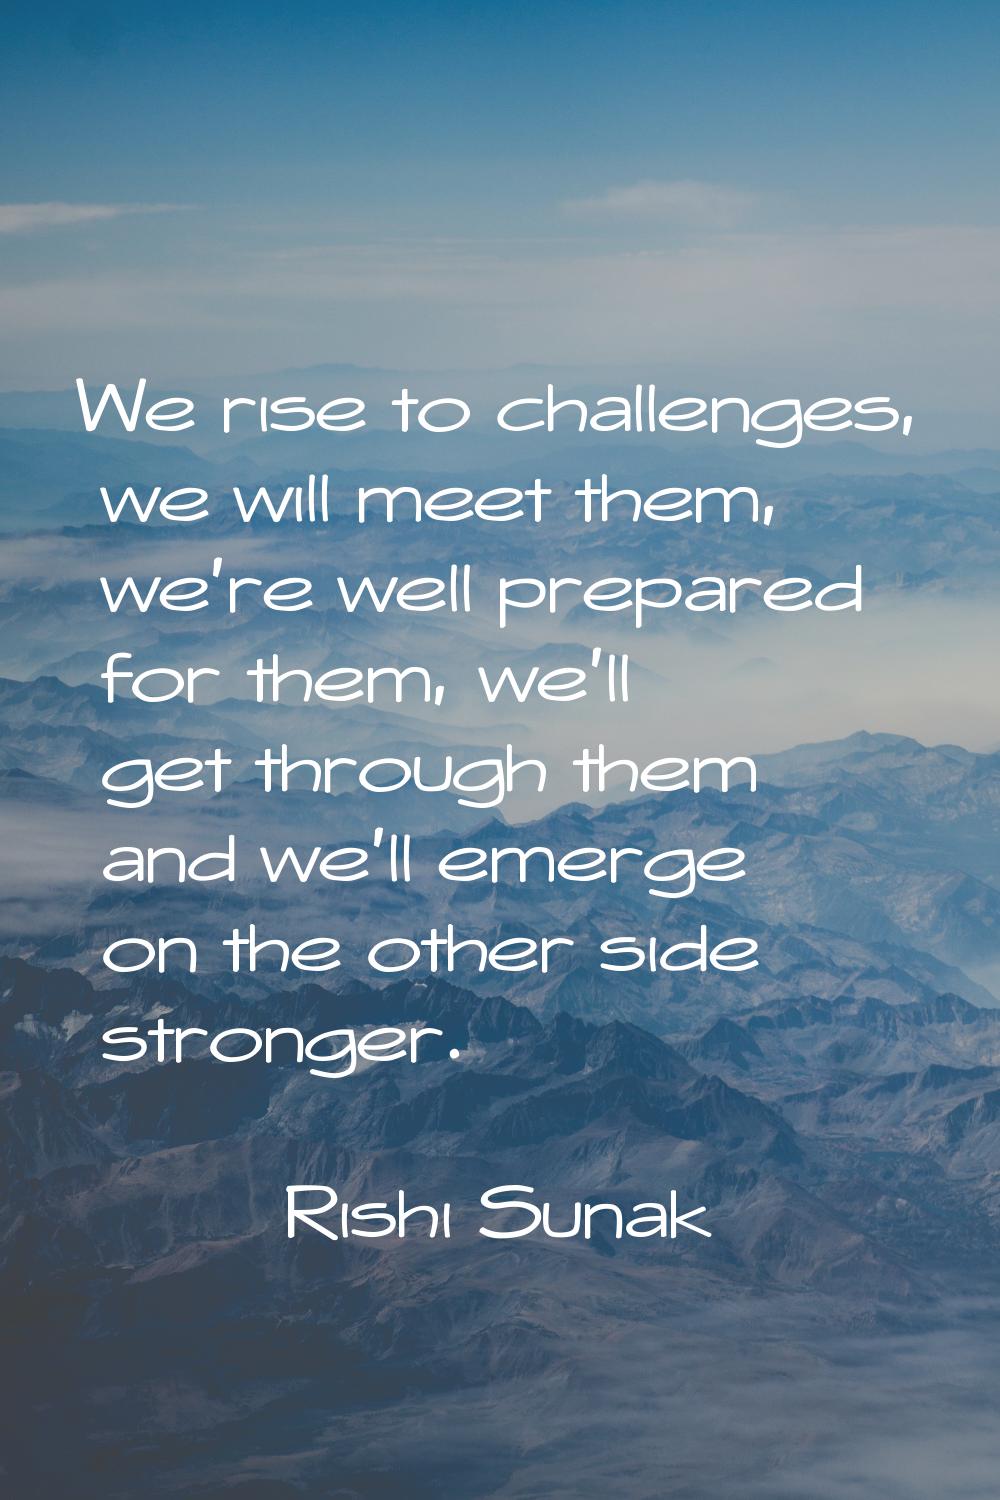 We rise to challenges, we will meet them, we're well prepared for them, we'll get through them and 